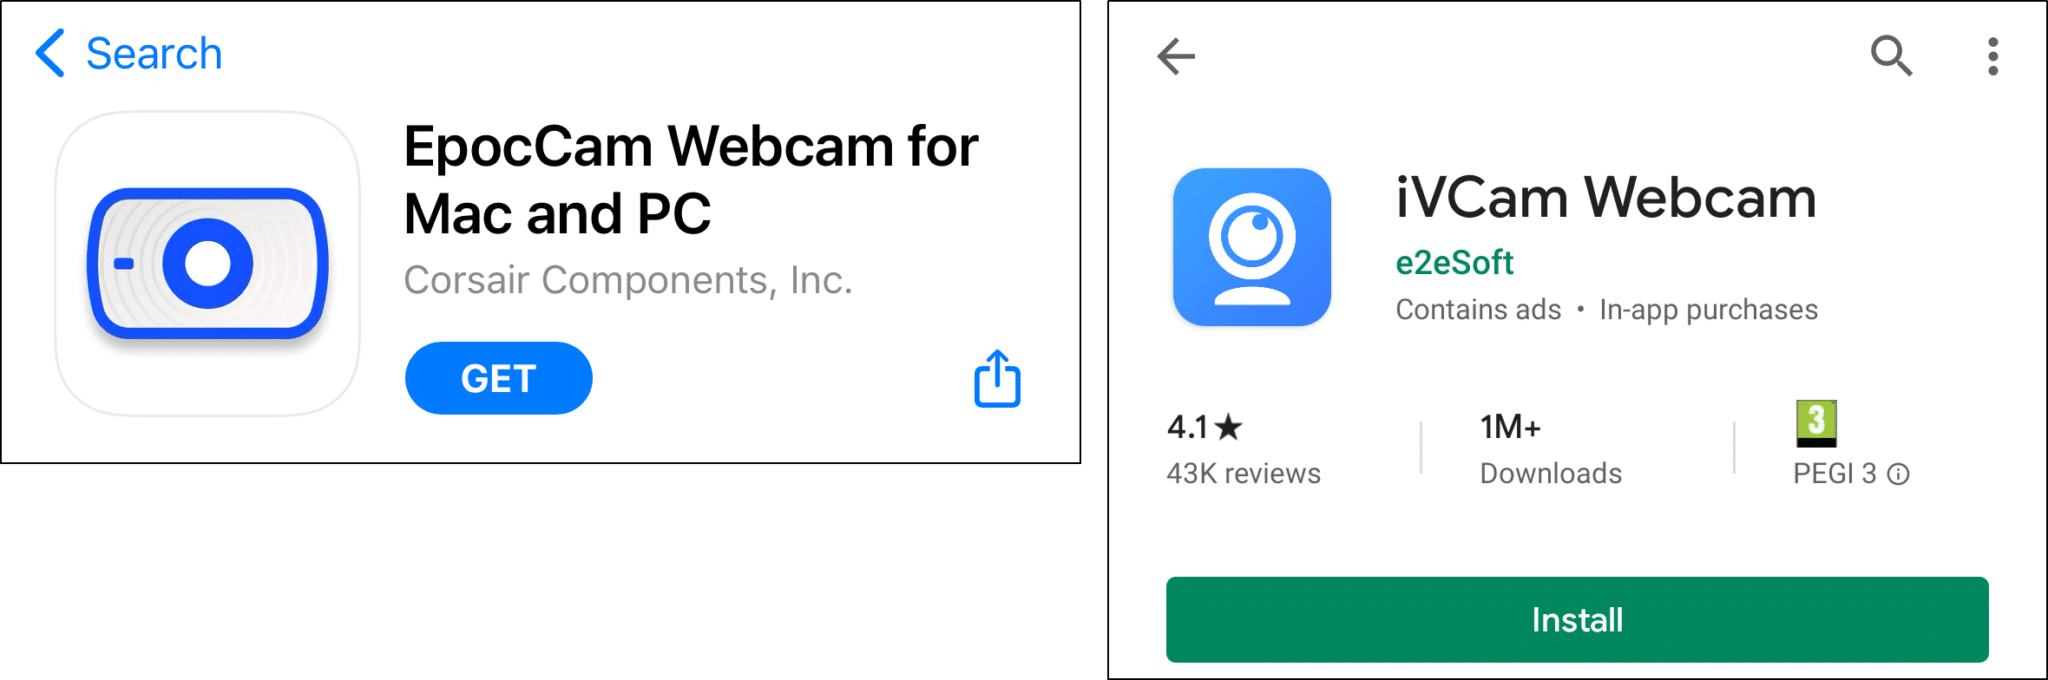 install webcam app on iPhone, iPad and android to use phone as webcam to fix zoom virtual background not working